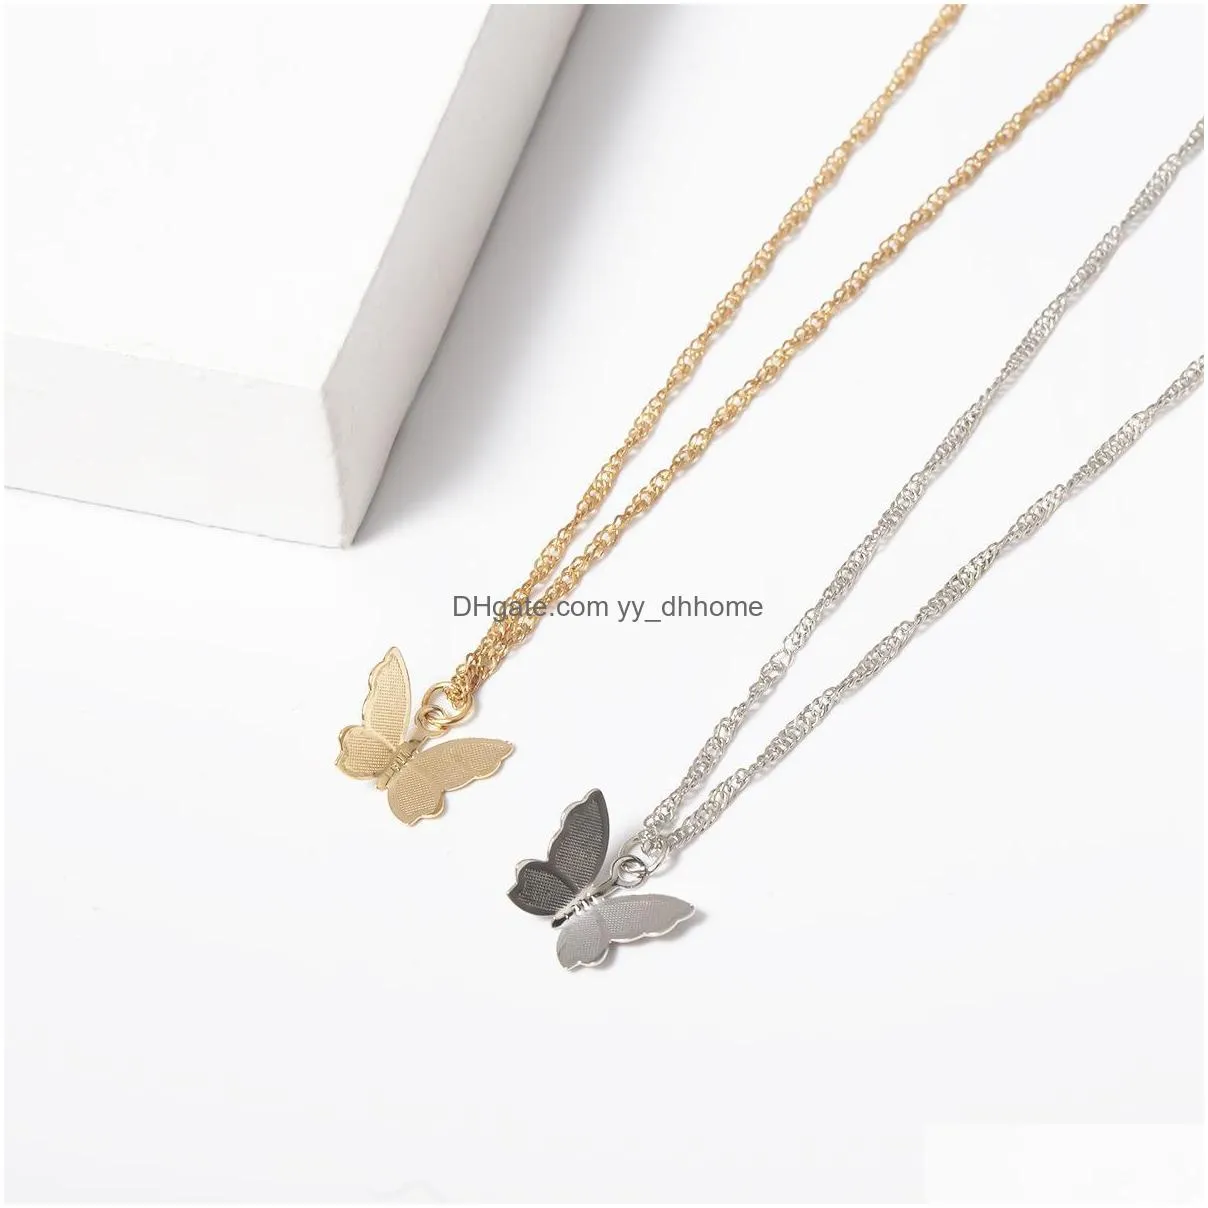 butterfly necklace earrings women earings gold chains necklace girls chokers womens pendant necklaces fashion jewelry gift 